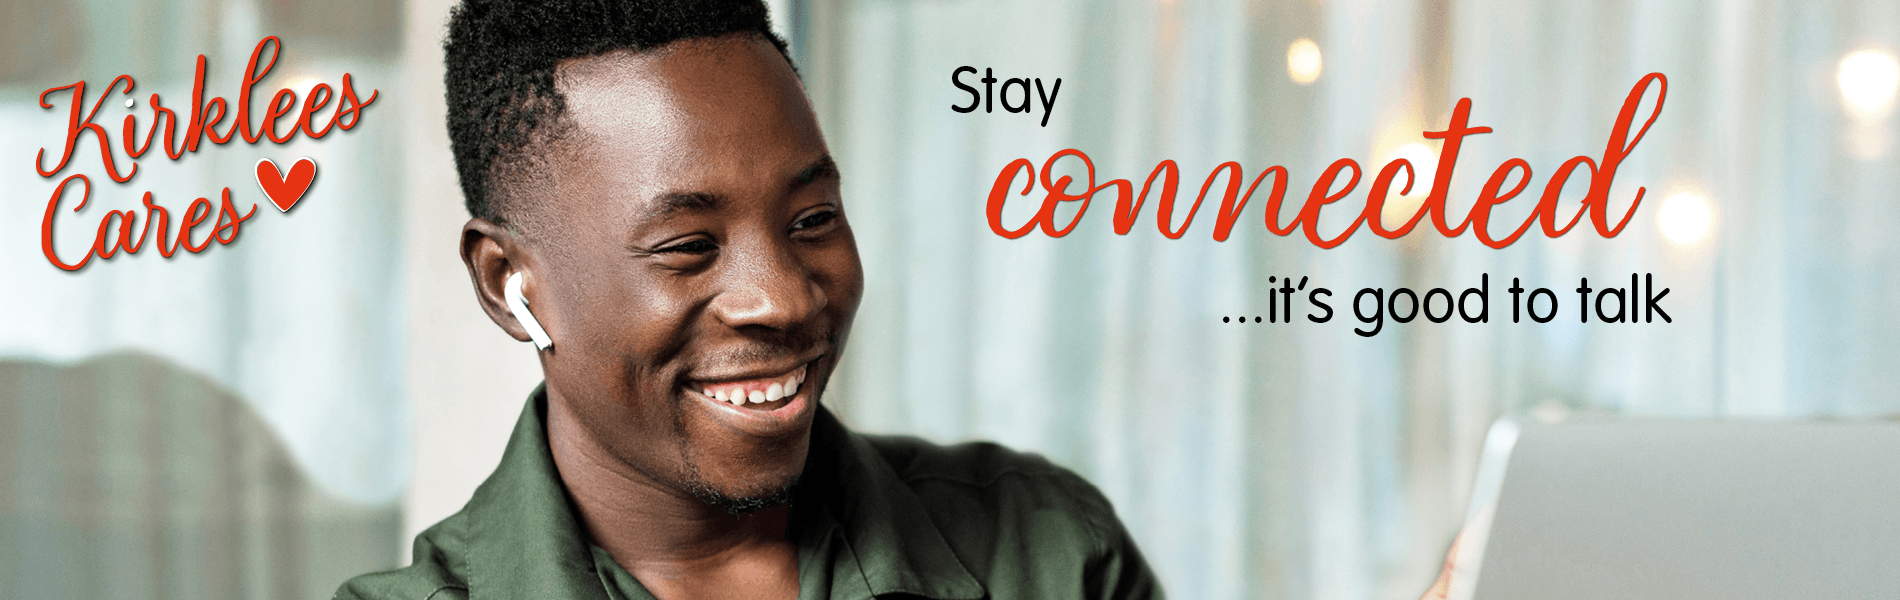 A man smiling with a message saying stay connected... it's good to talk.